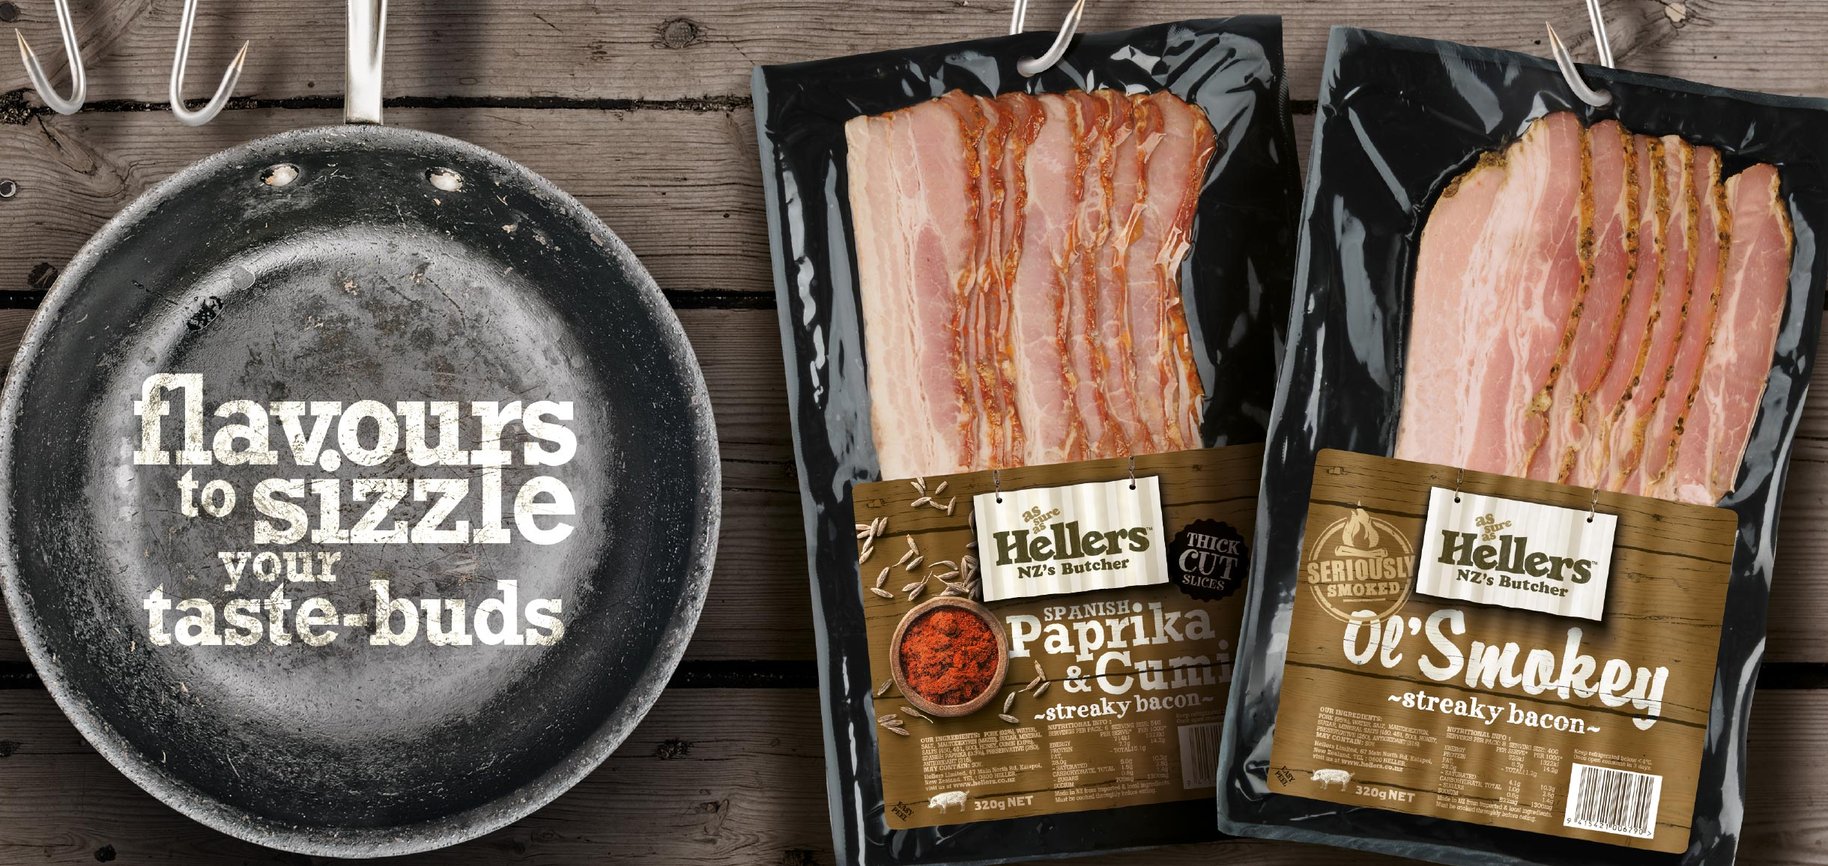 Hellers brand identity food show signage 